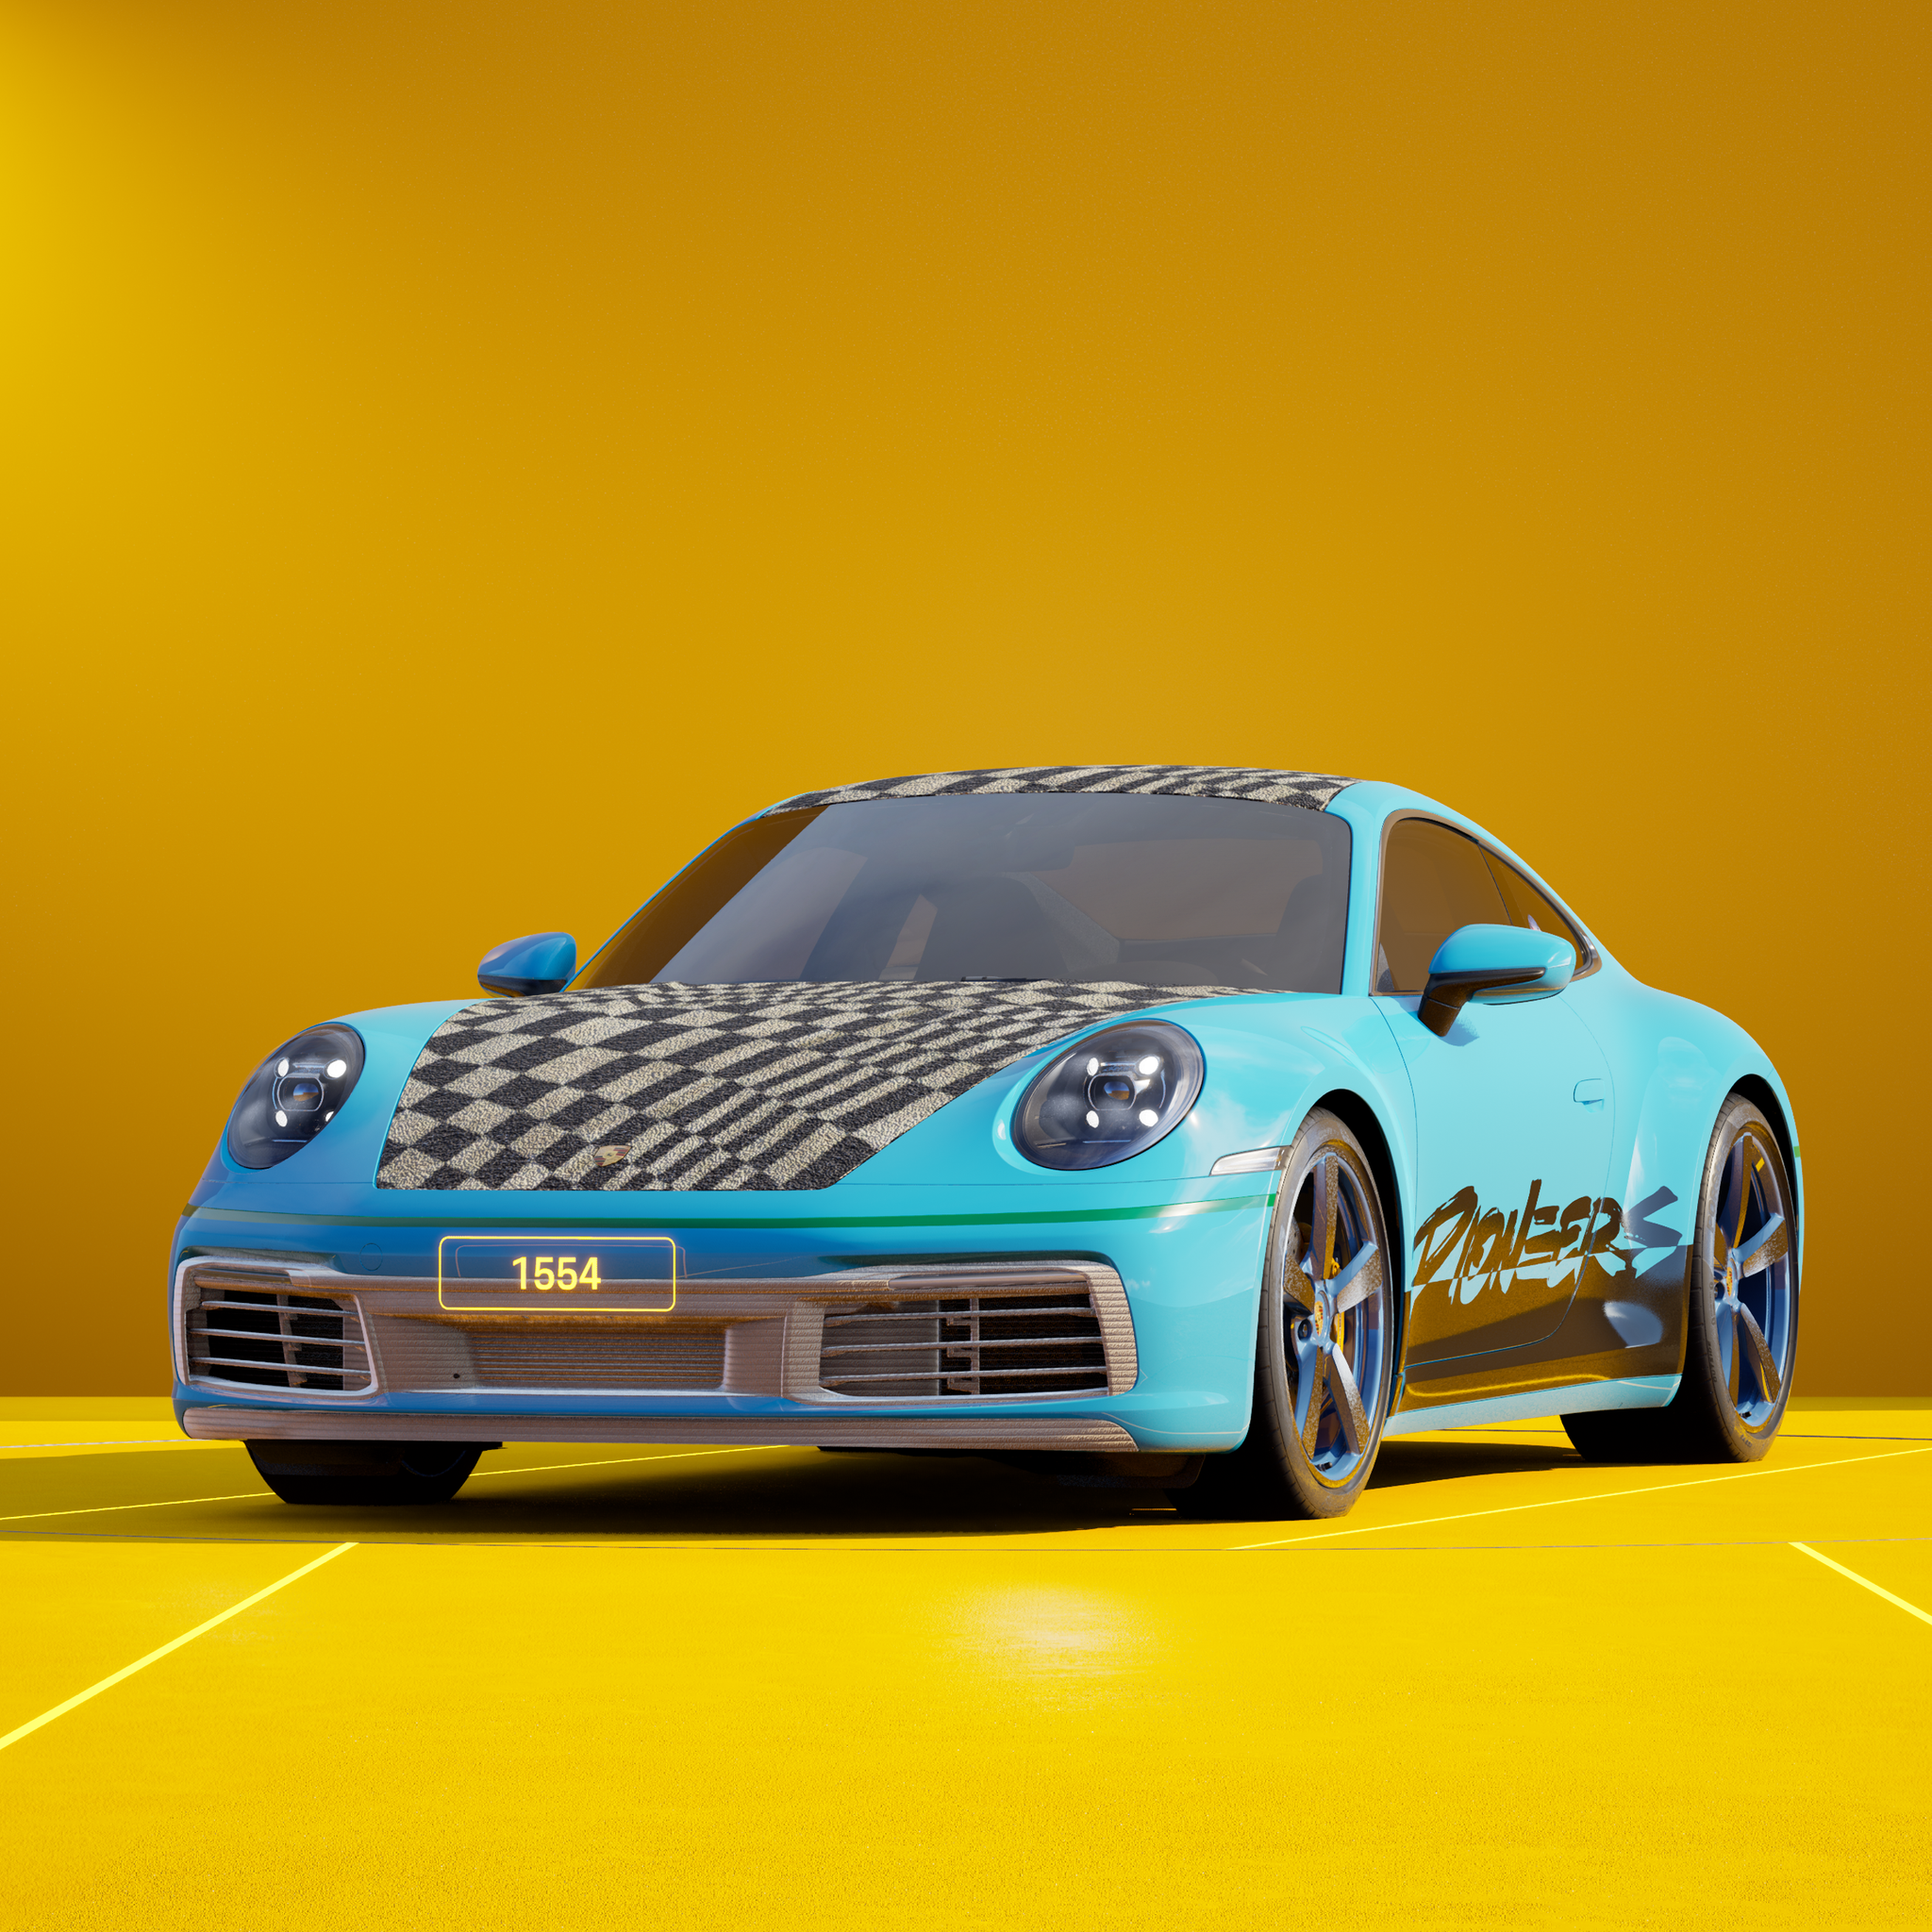 The PORSCHΞ 911 1554 image in phase